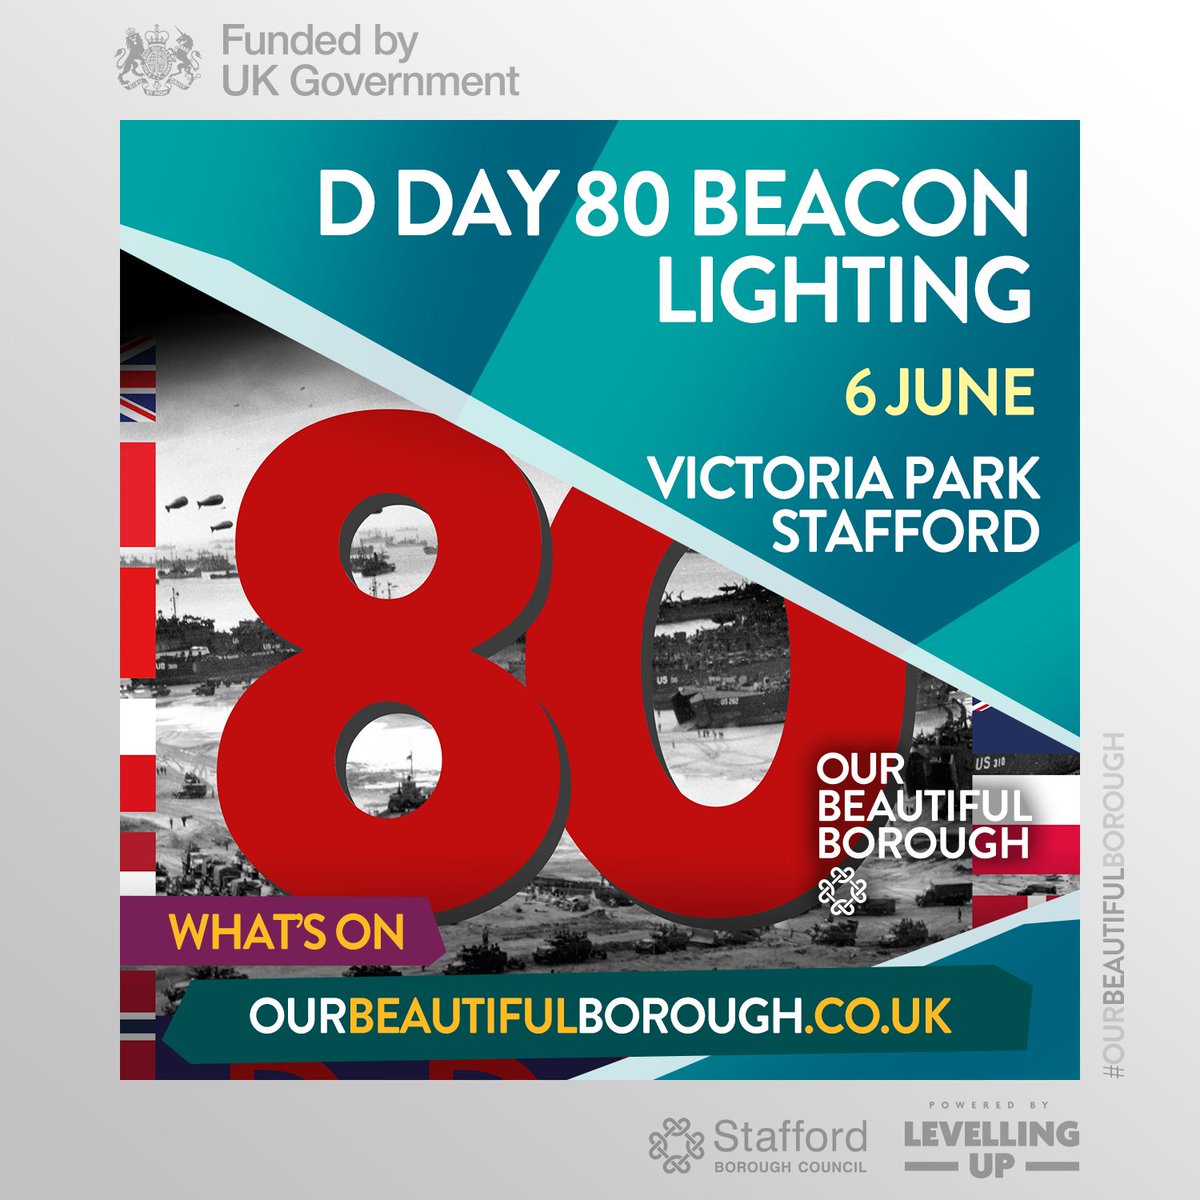 Join us in #VictoriaPark #Stafford on Thurs 6 June as part of the international commemoration of the 80th Anniversary of #DDay. Live entertainment from 6pm. Beacon Lighting Ceremony from 9pm. More details: tinyurl.com/2urac69t #NightsOut #SpecialOccasions #OurBeautifulBorough